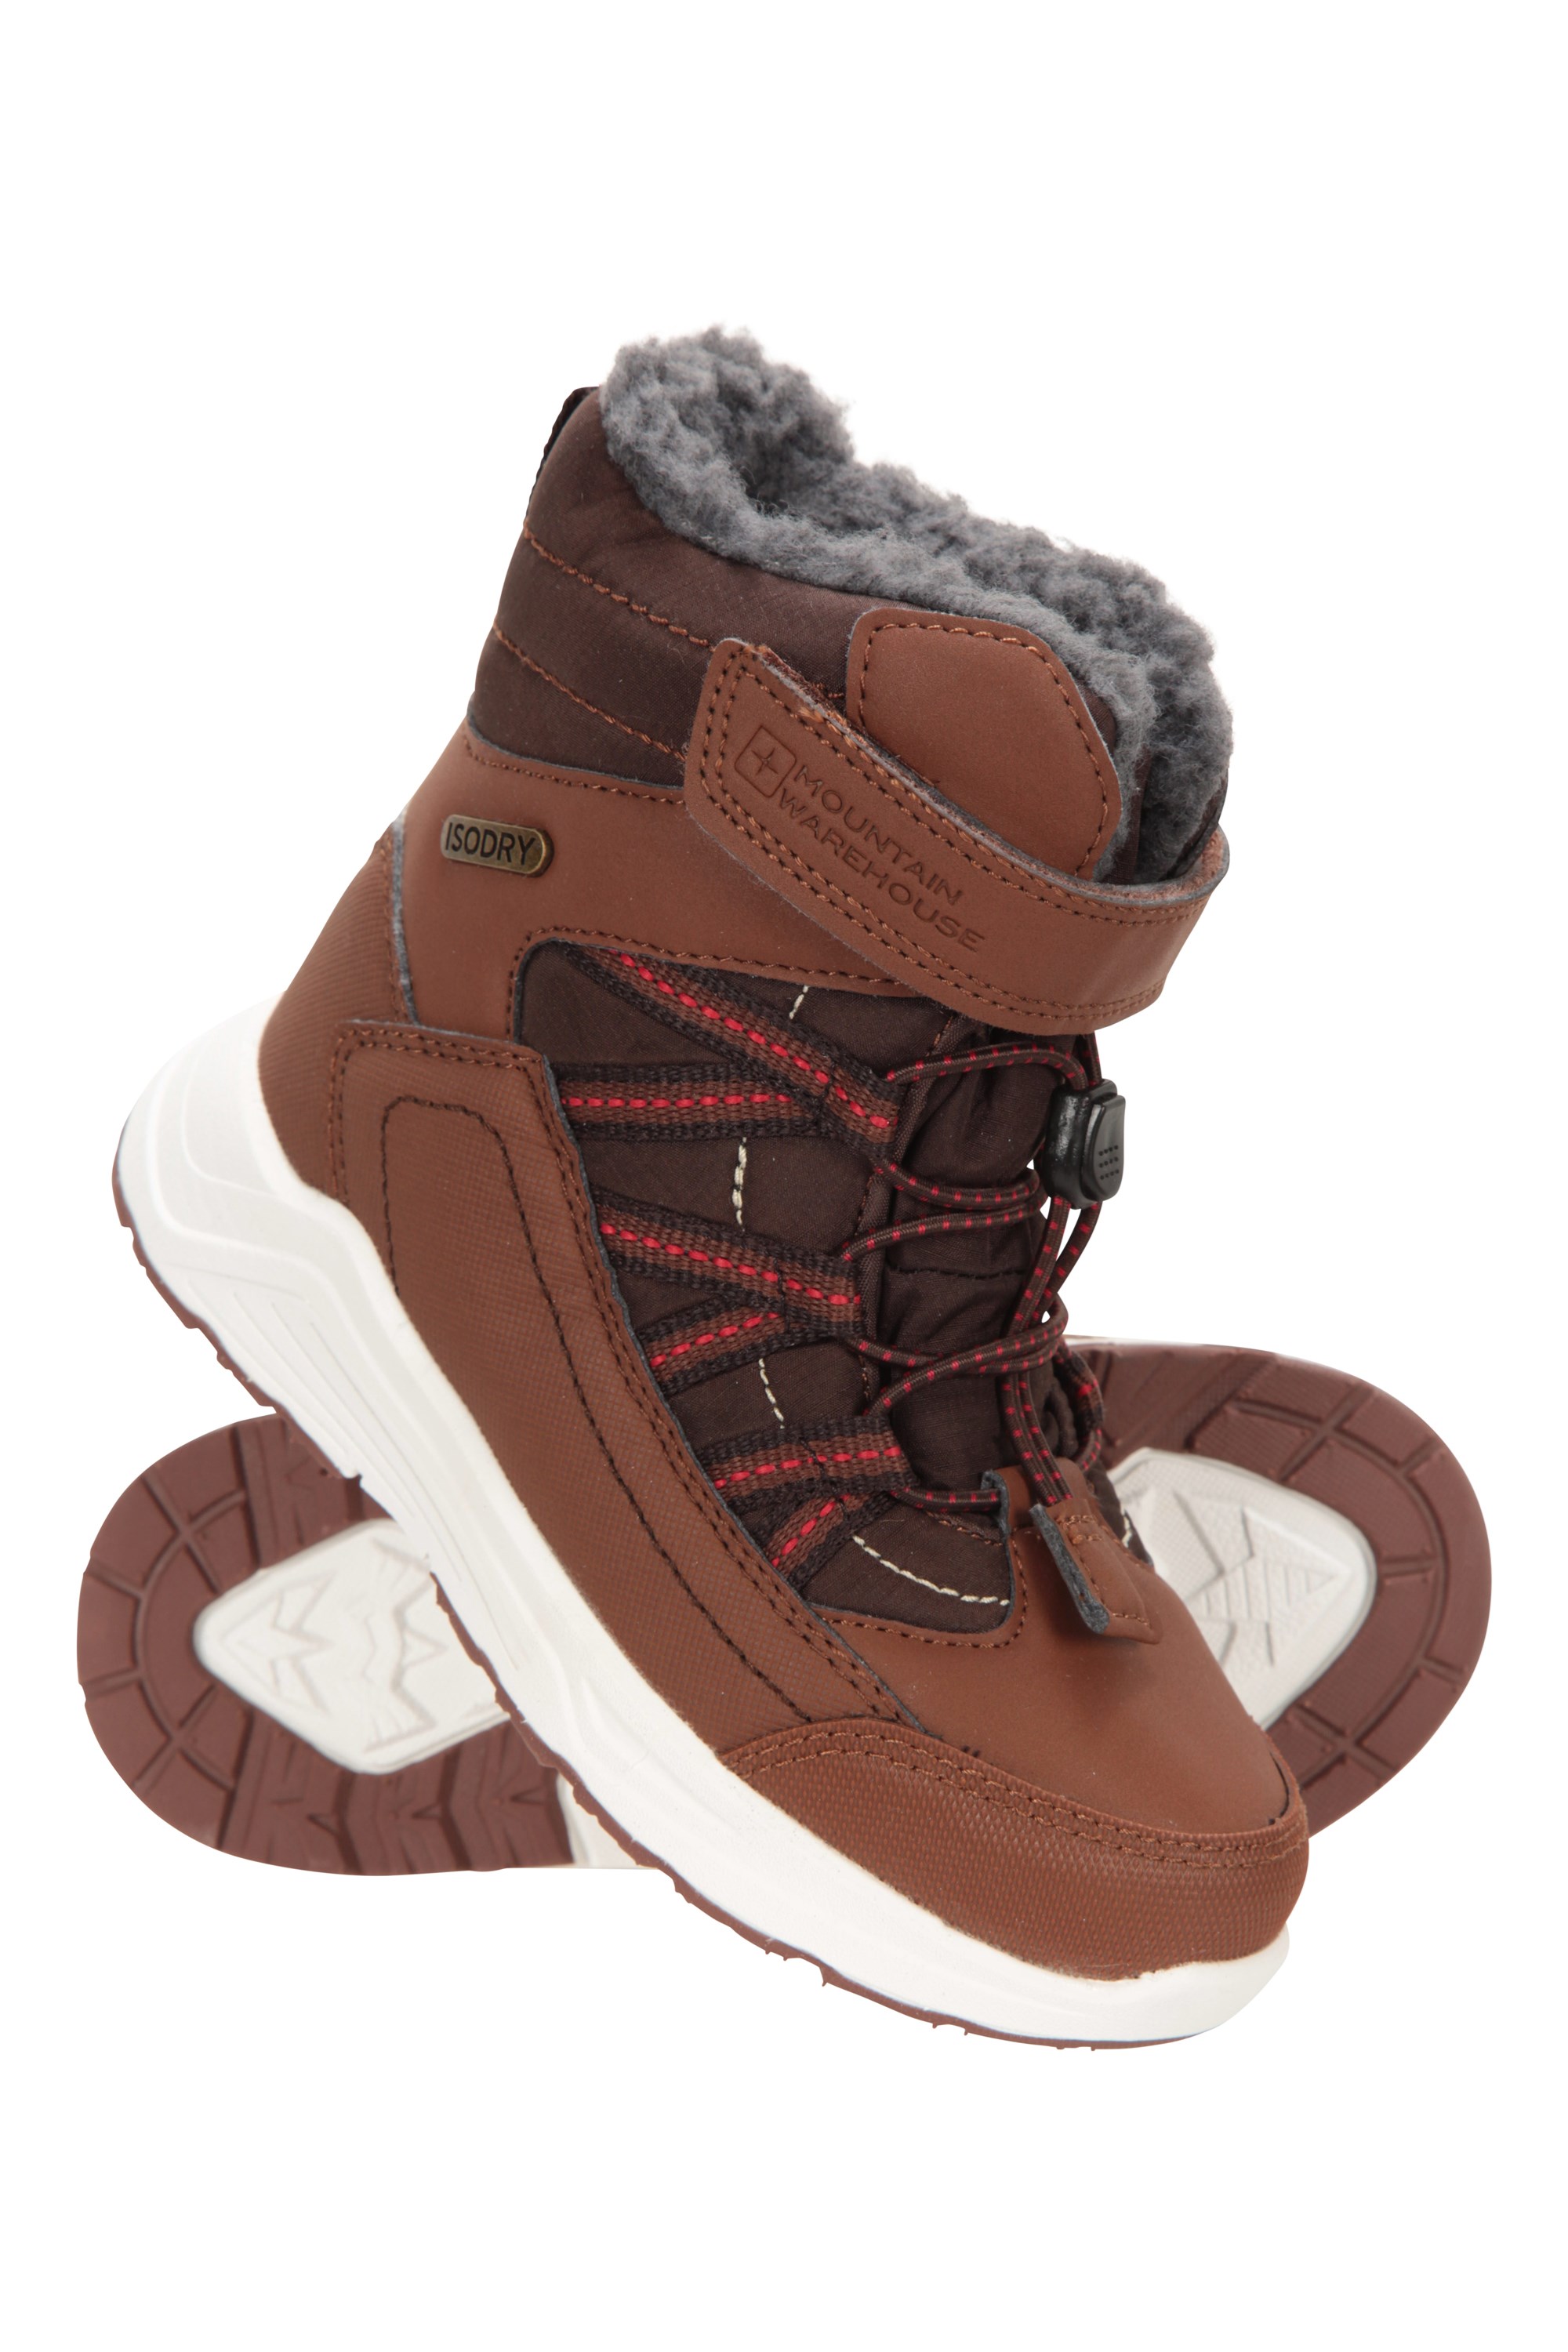 Mountain Warehouse Waterproof Kids Boots Mesh Lined Childrens Shoes